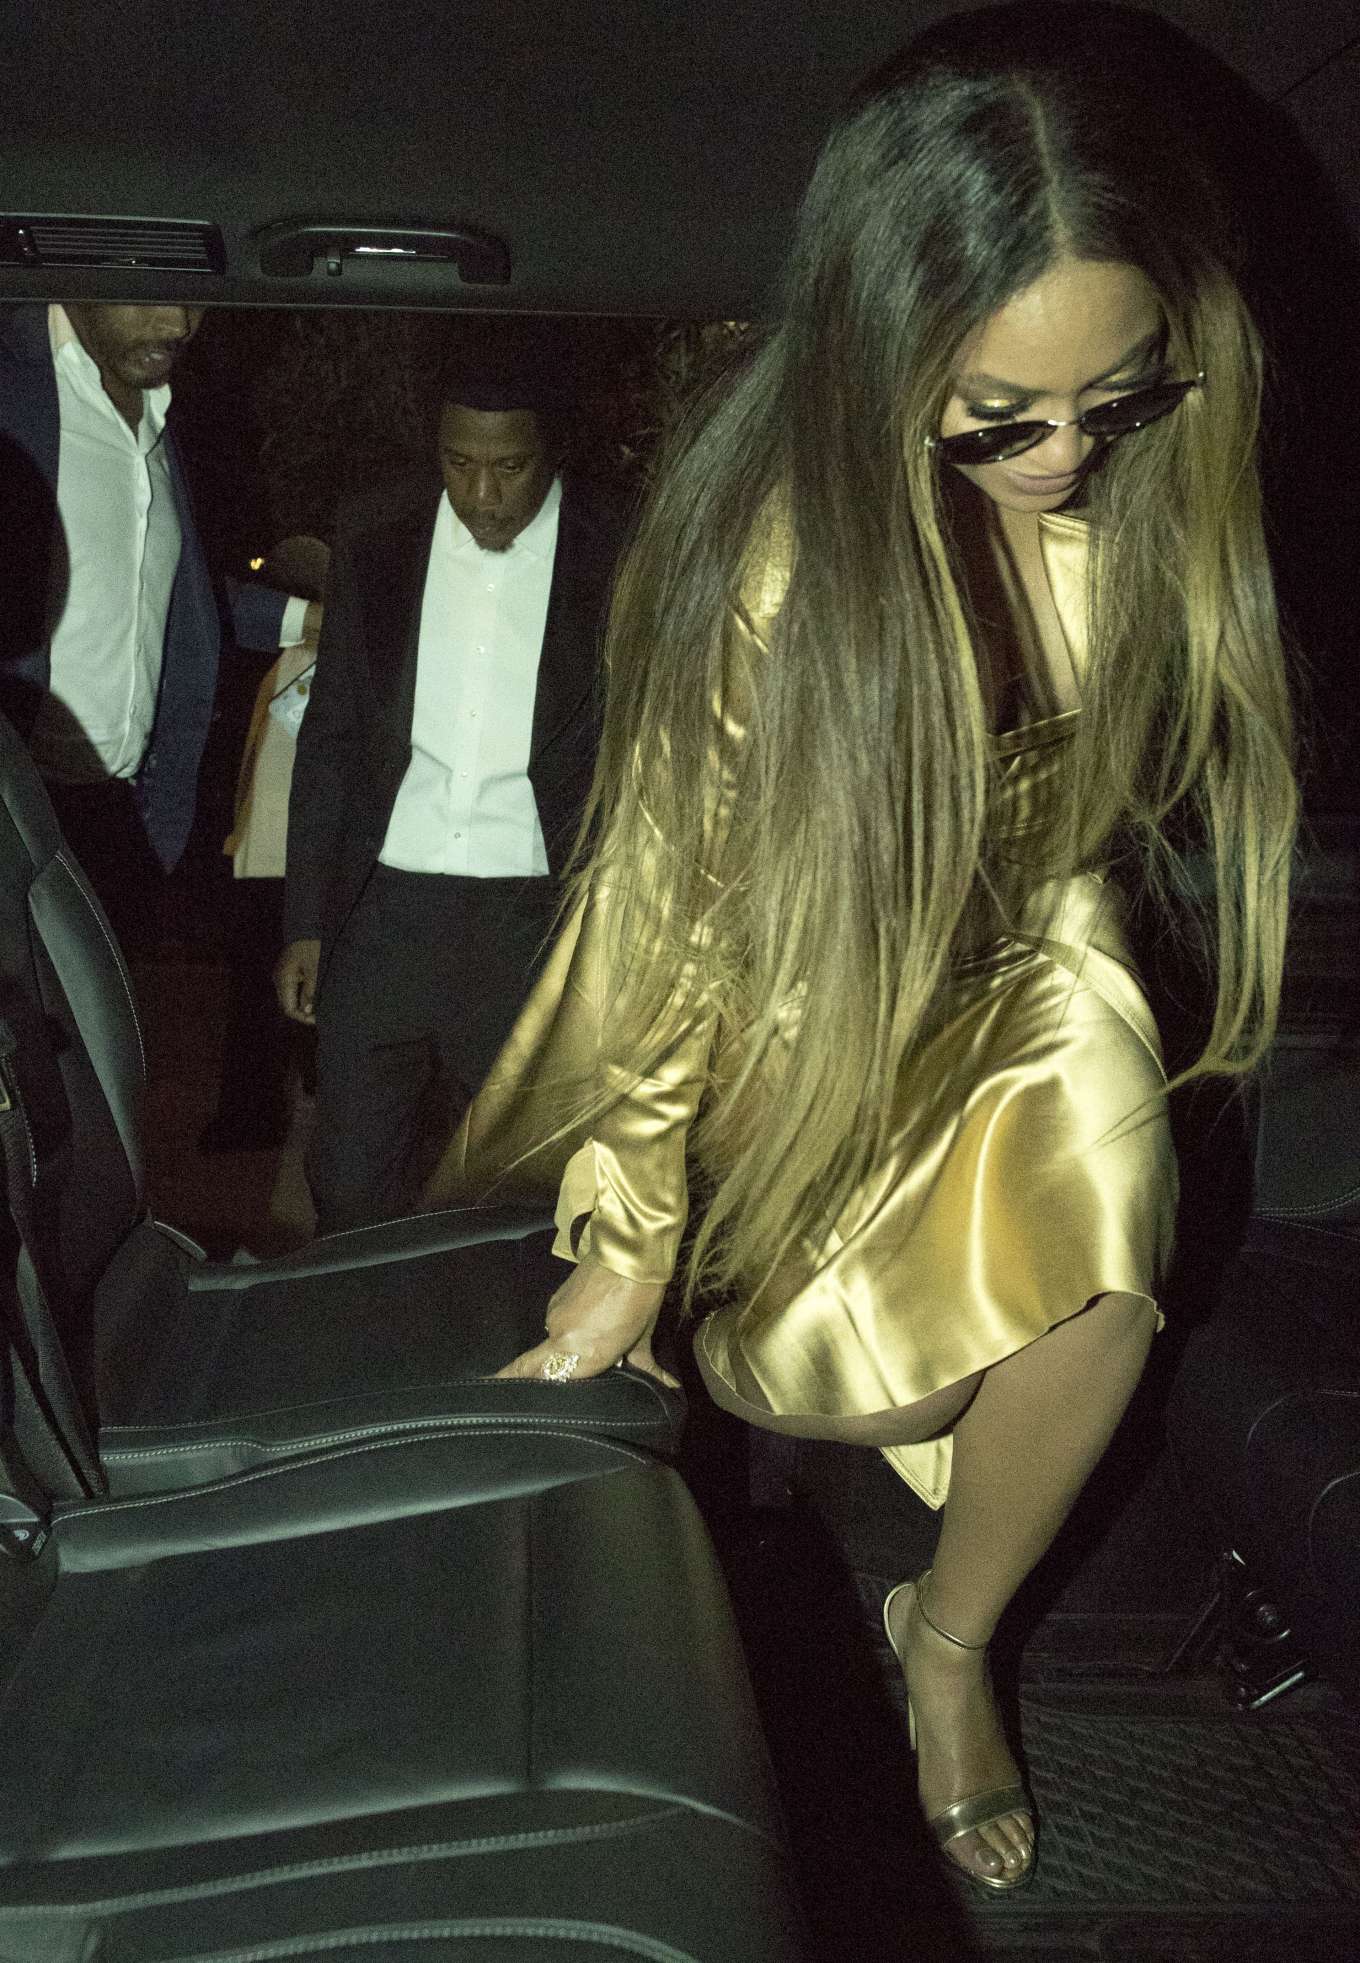 Beyonce â€“ Leaving a Private Party at Harryâ€™s Bar in London